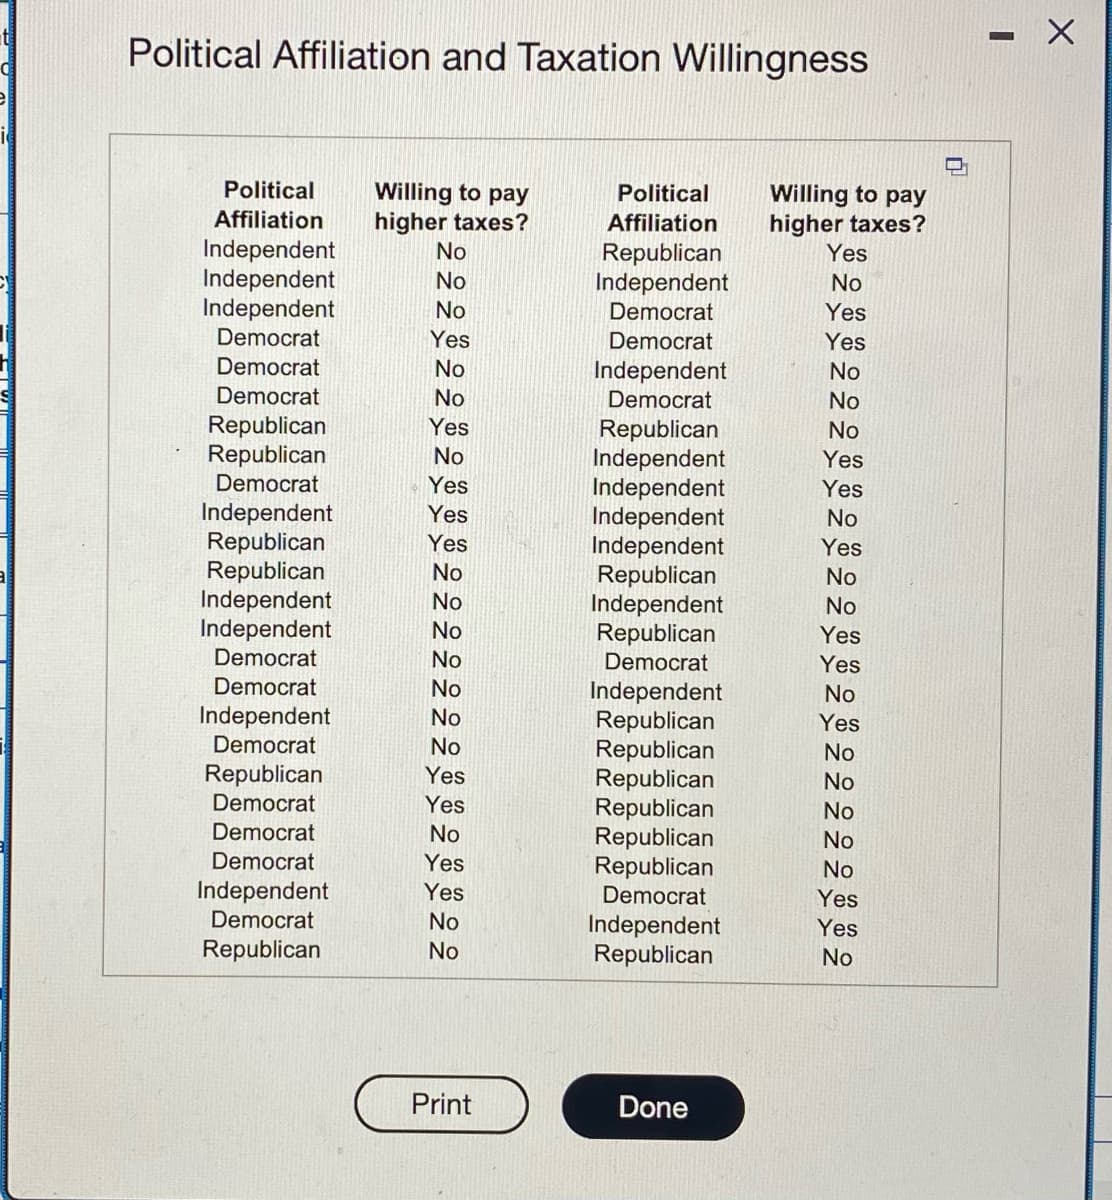 Political Affiliation and Taxation Willingness
Political Willing to pay
Affiliation higher taxes?
Independent
Independent
Independent
Democrat
Democrat
Democrat
Republican
Republican
Democrat
Independent
Republican
Republican
Independent
Independent
Democrat
Democrat
Independent
Democrat
Republican
Democrat
Democrat
Democrat
Independent
Democrat
Republican
No
No
No
Yes
No
No
Yes
No
Yes
Yes
Yes
No
No
No
No
No
No
No
Yes
Yes
No
Yes
Yes
No
No
Print
Political
Affiliation
Republican
Independent
Democrat
Democrat
Independent
Democrat
Republican
Independent
Independent
Independent
Independent
Republican
Independent
Republican
Democrat
Independent
Republican
Republican
Republican
Republican
Republican
Republican
Democrat
Independent
Republican
Done
Willing to pay
higher taxes?
Yes
No
Yes
Yes
No
No
No
Yes
Yes
No
Yes
No
No
Yes
Yes
No
Yes
No
No
No
No
No
Yes
Yes
No
0
-